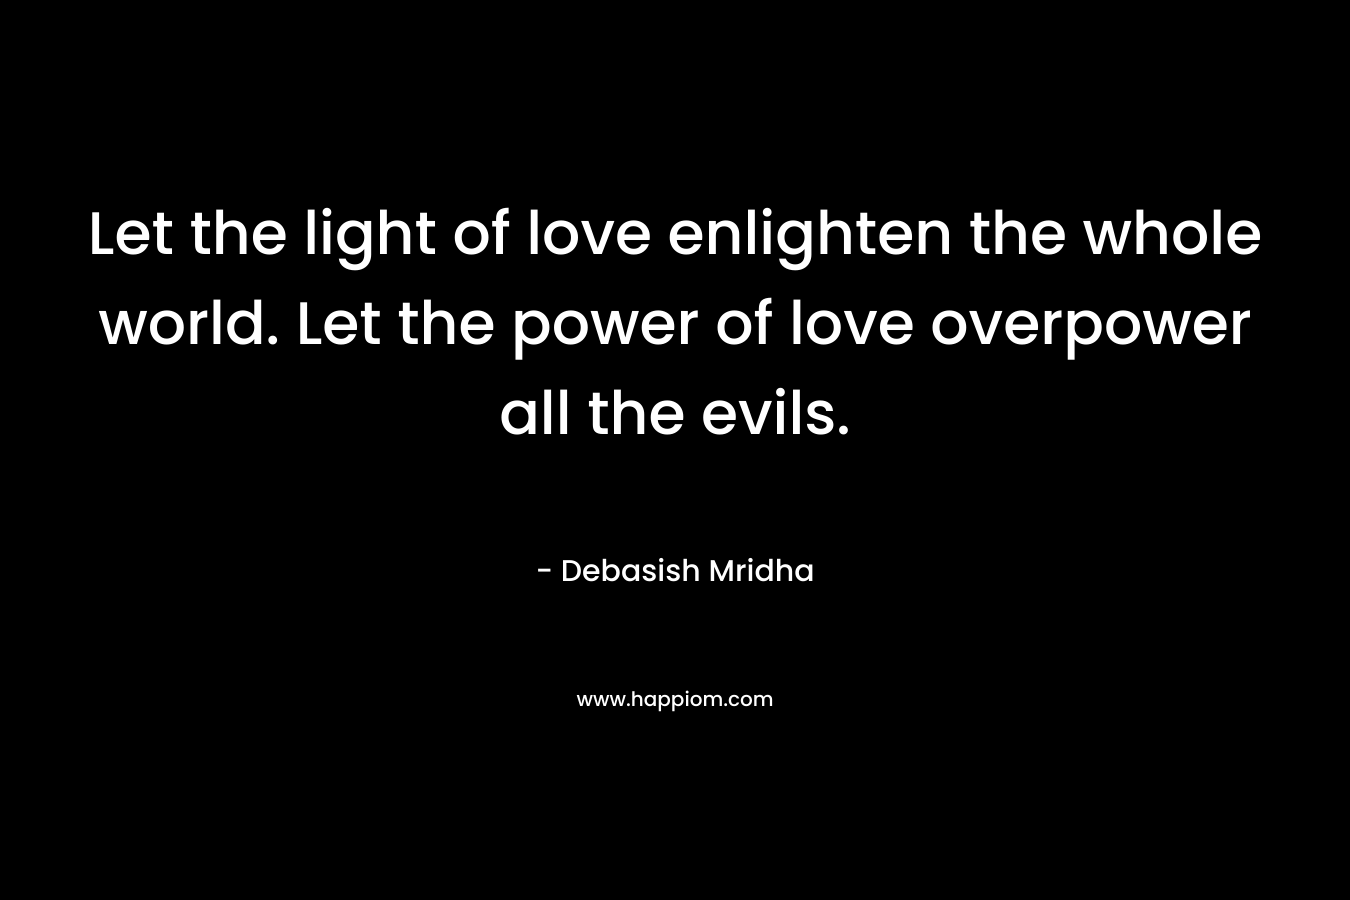 Let the light of love enlighten the whole world. Let the power of love overpower all the evils. – Debasish Mridha